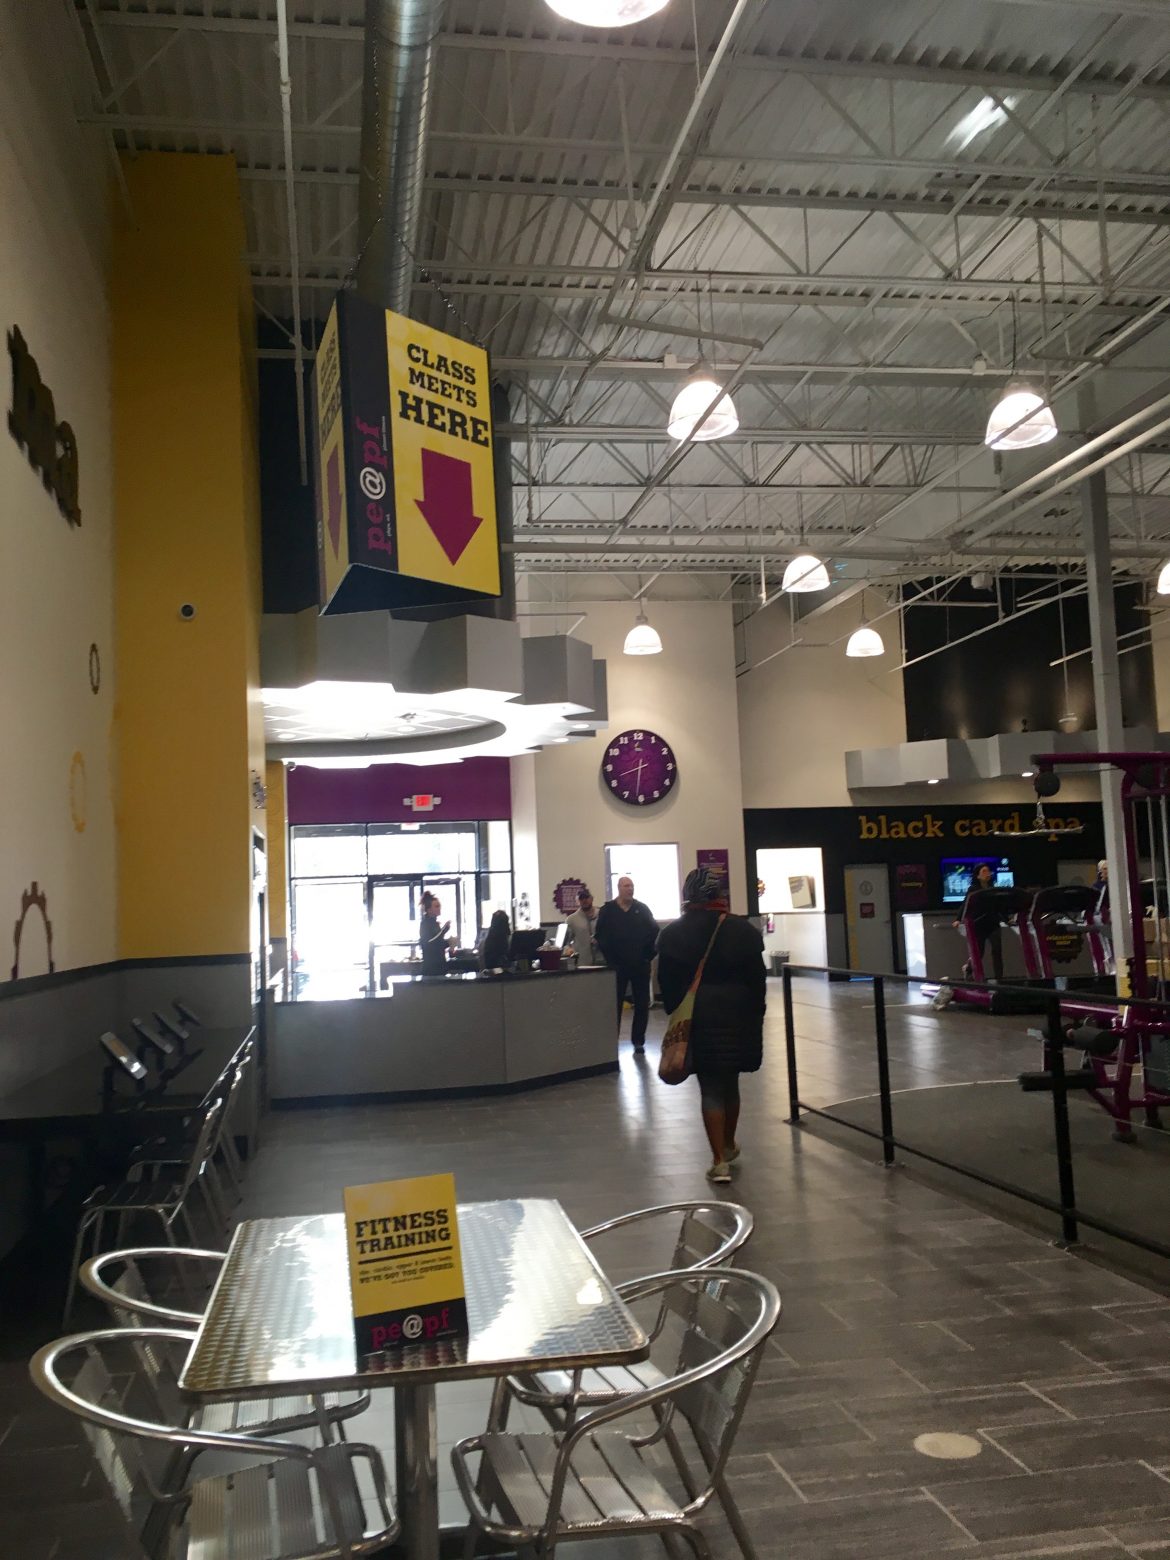 5 Day Is Planet Fitness Open 24 Hours Again for Burn Fat fast